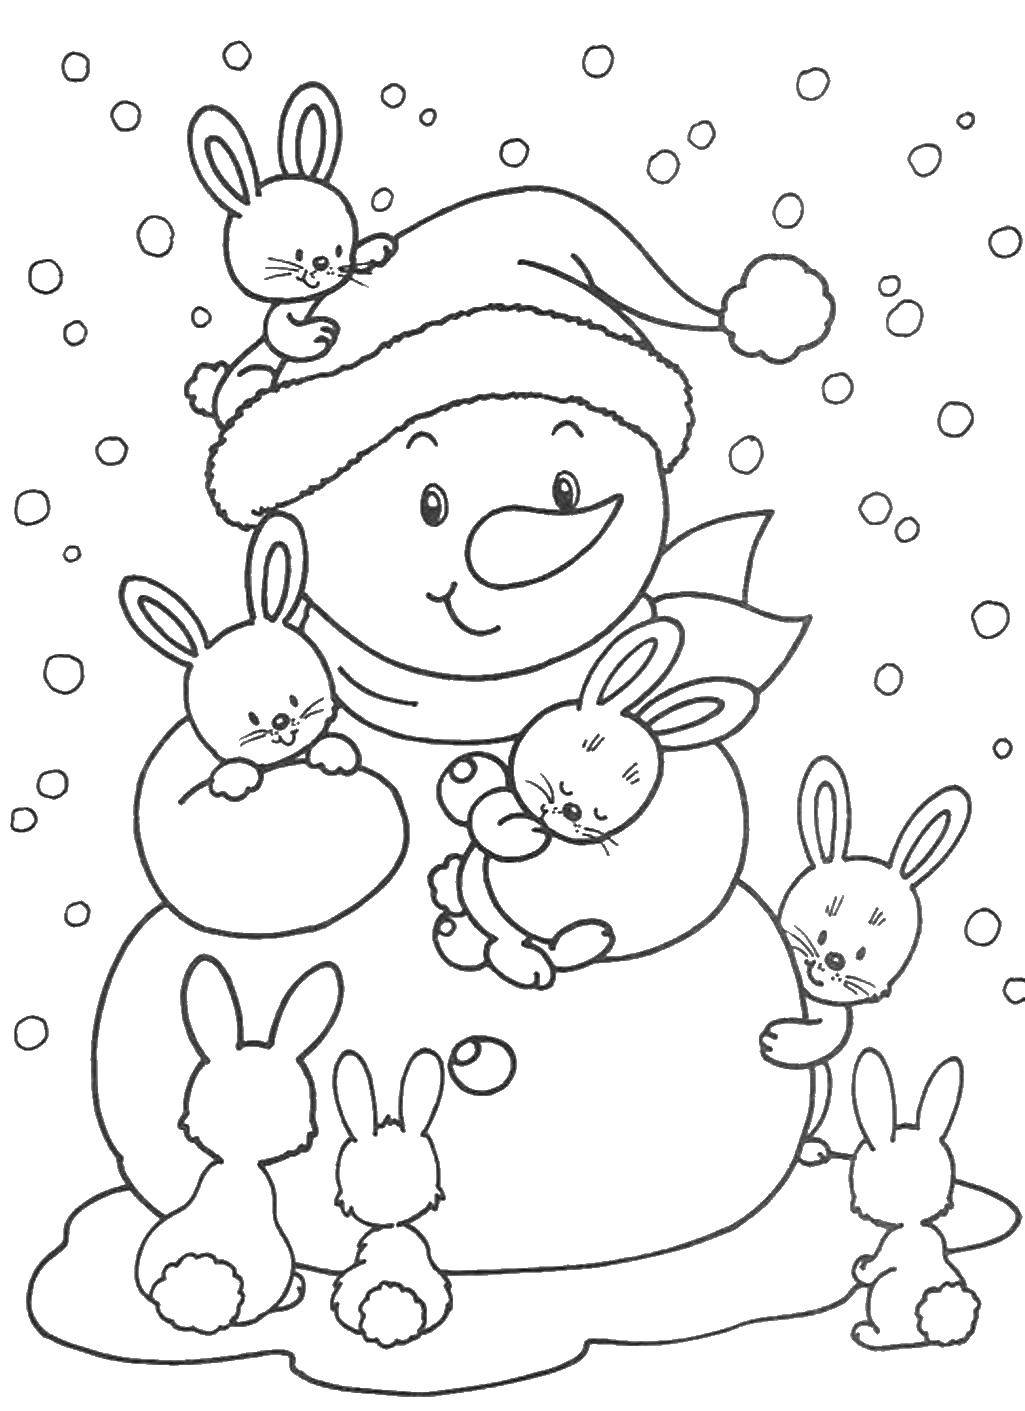 Coloring Bunnies around the snowman. Category coloring winter. Tags:  winter, snowman, bunnies.